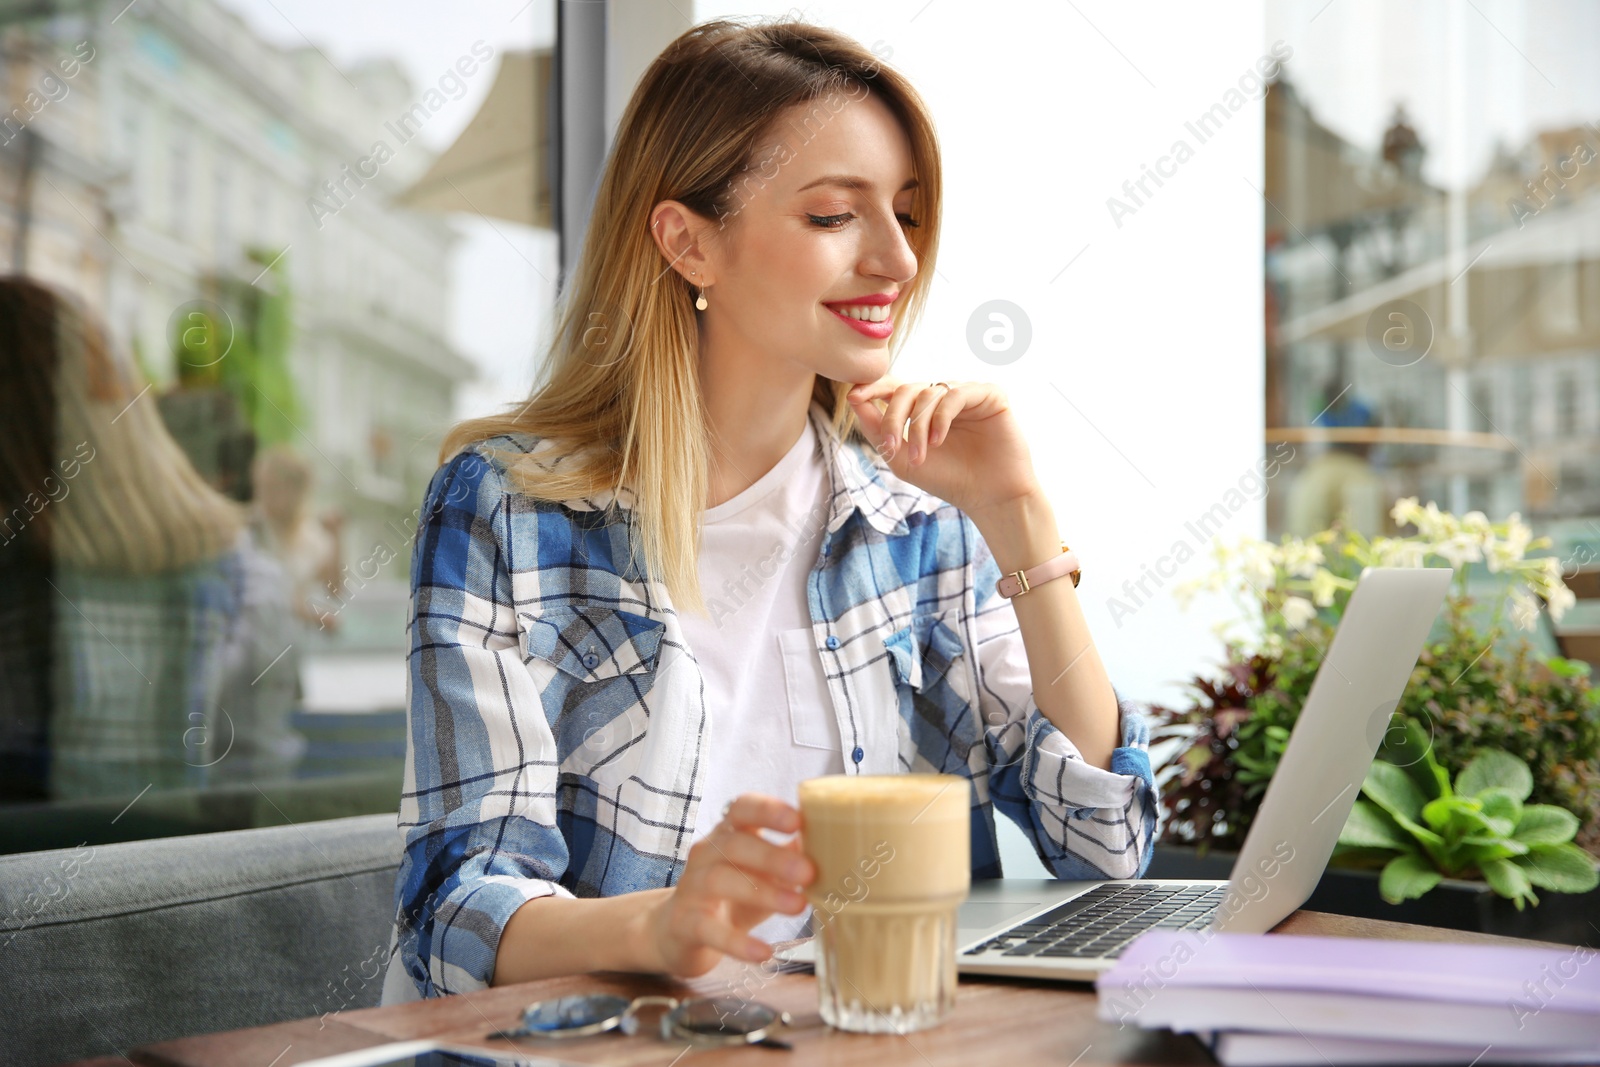 Photo of Young woman working with laptop at desk in cafe